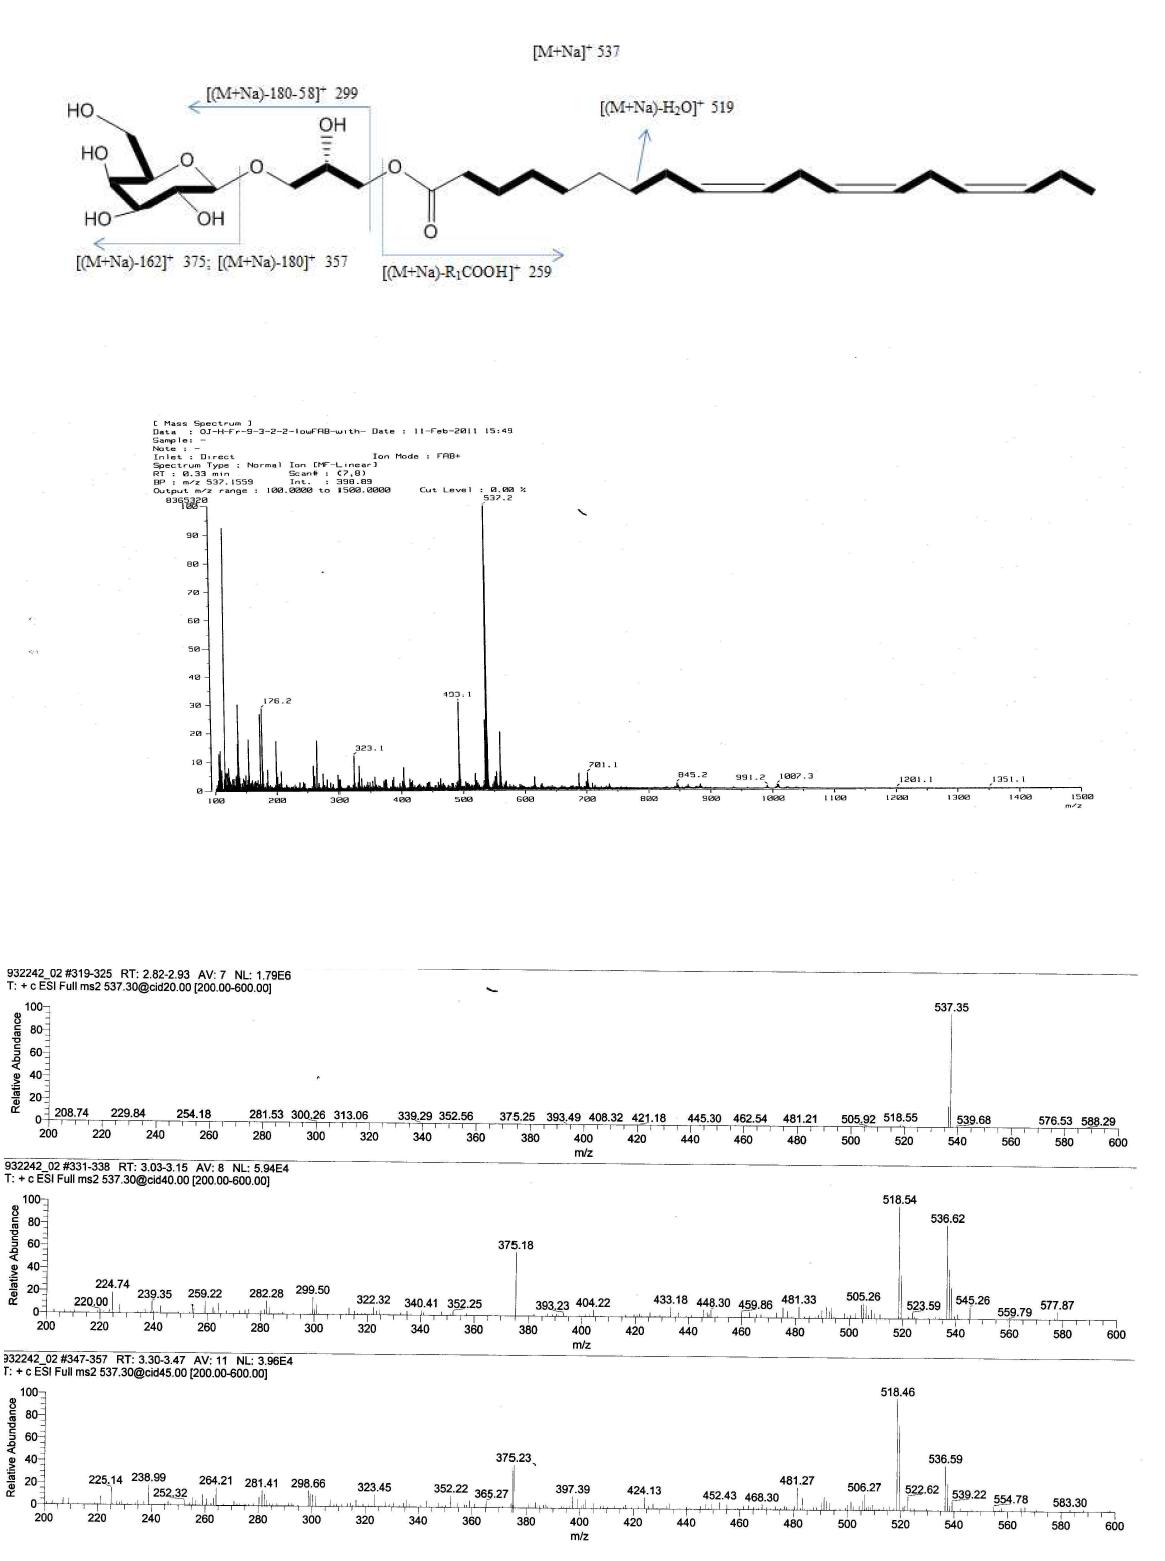 The FABMS and ESI-MS/MS data of compound 2